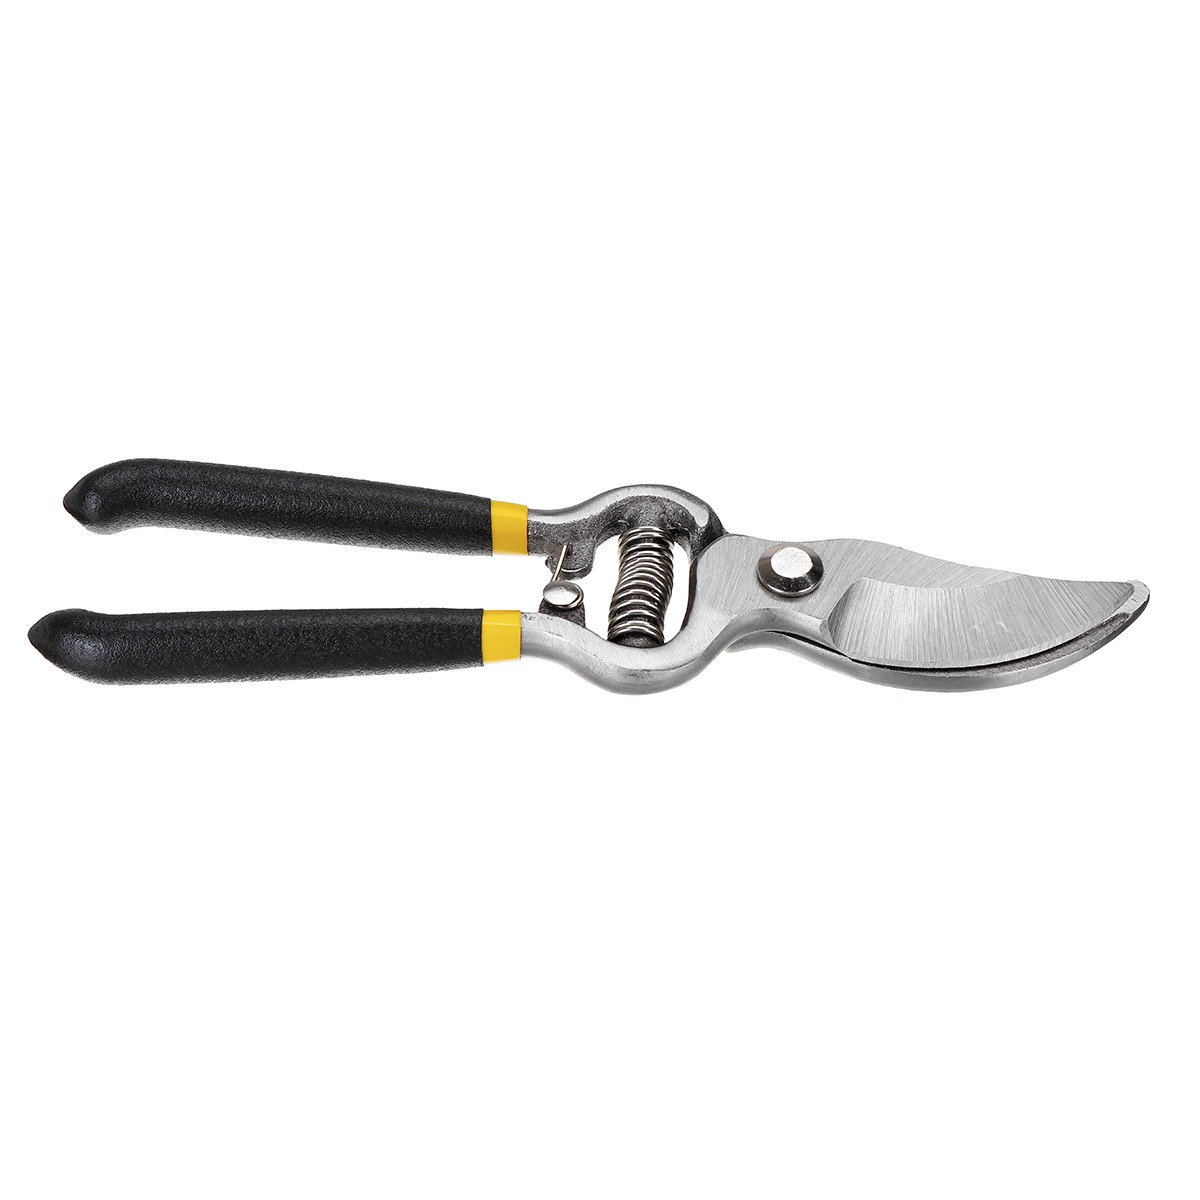 8inch-Carbon-Steel-Professional-Loppers-Garden-Cutter-Bypass-Tree-Pruning-Shears-Clippers-1412616-6